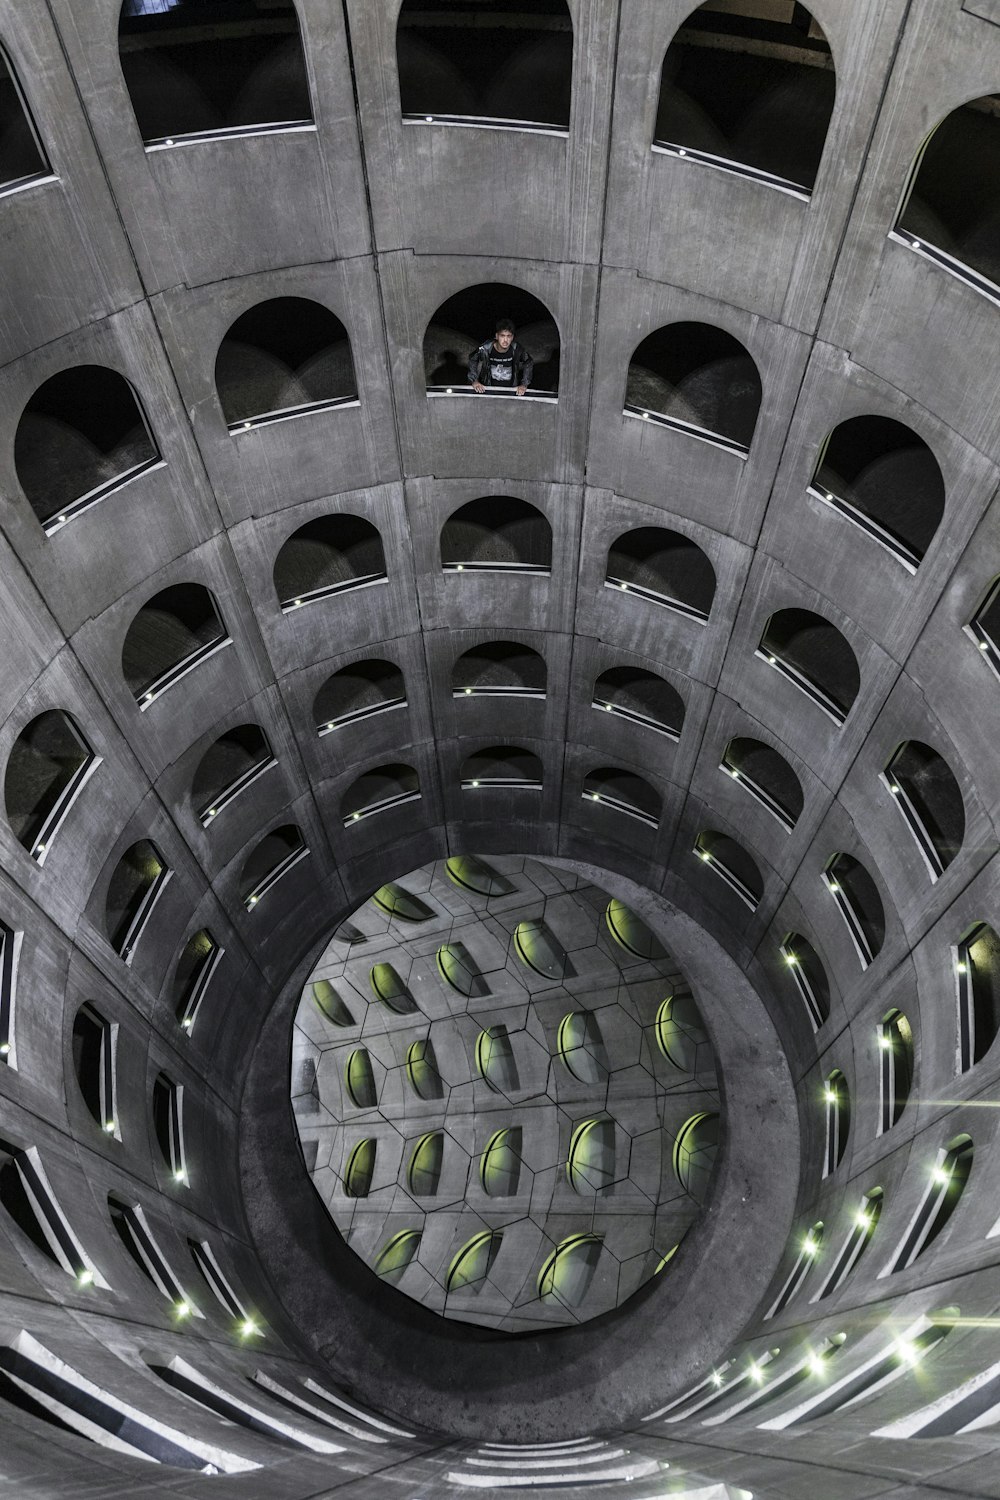 the inside of a building with a circular hole in the center